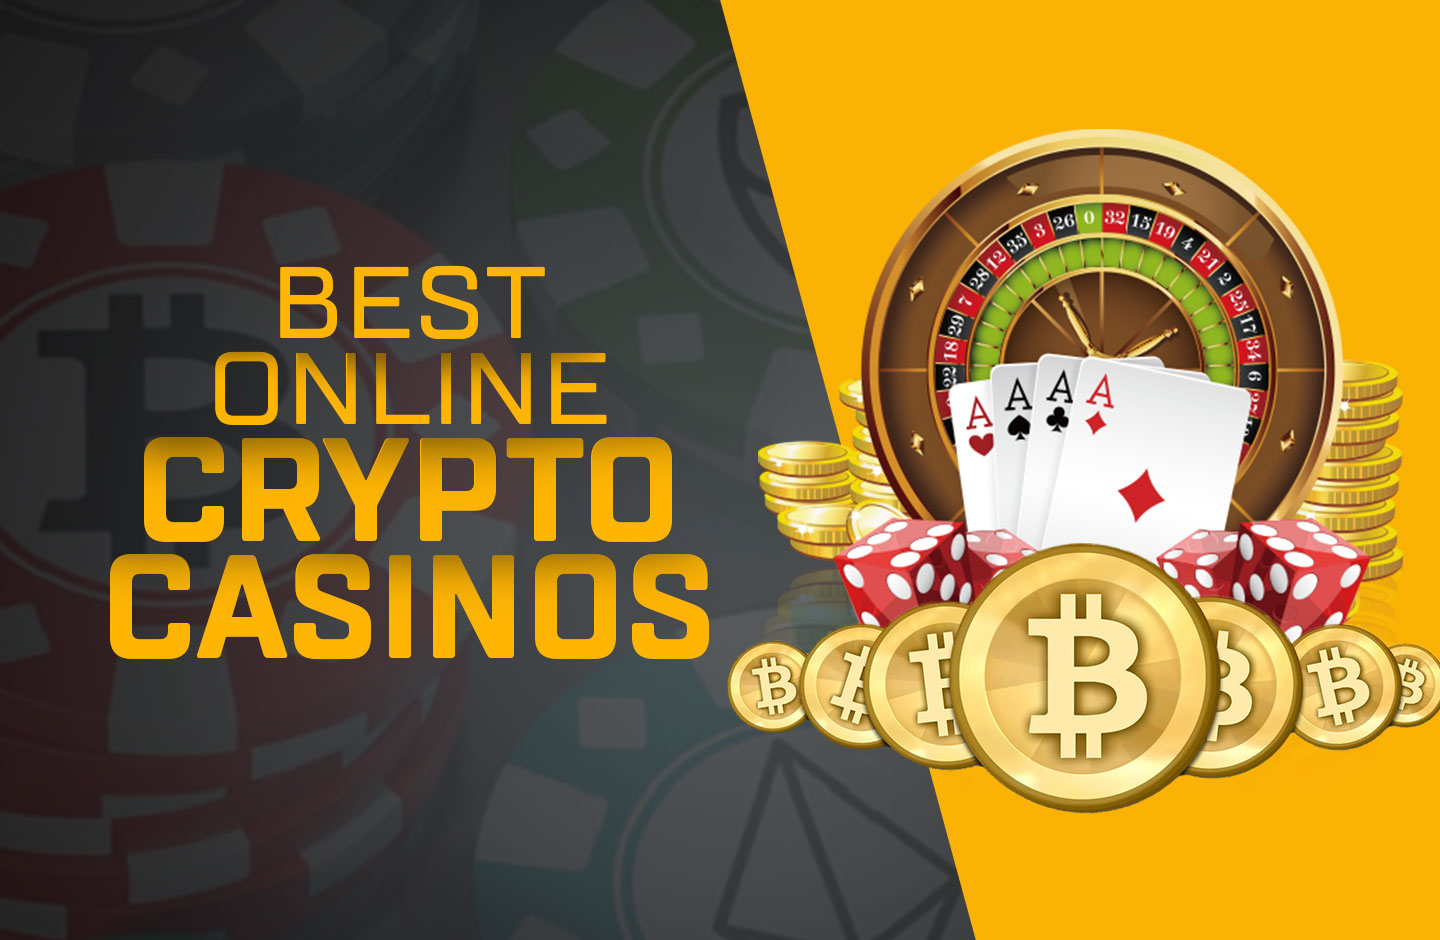 bitcoin casino sites? It's Easy If You Do It Smart